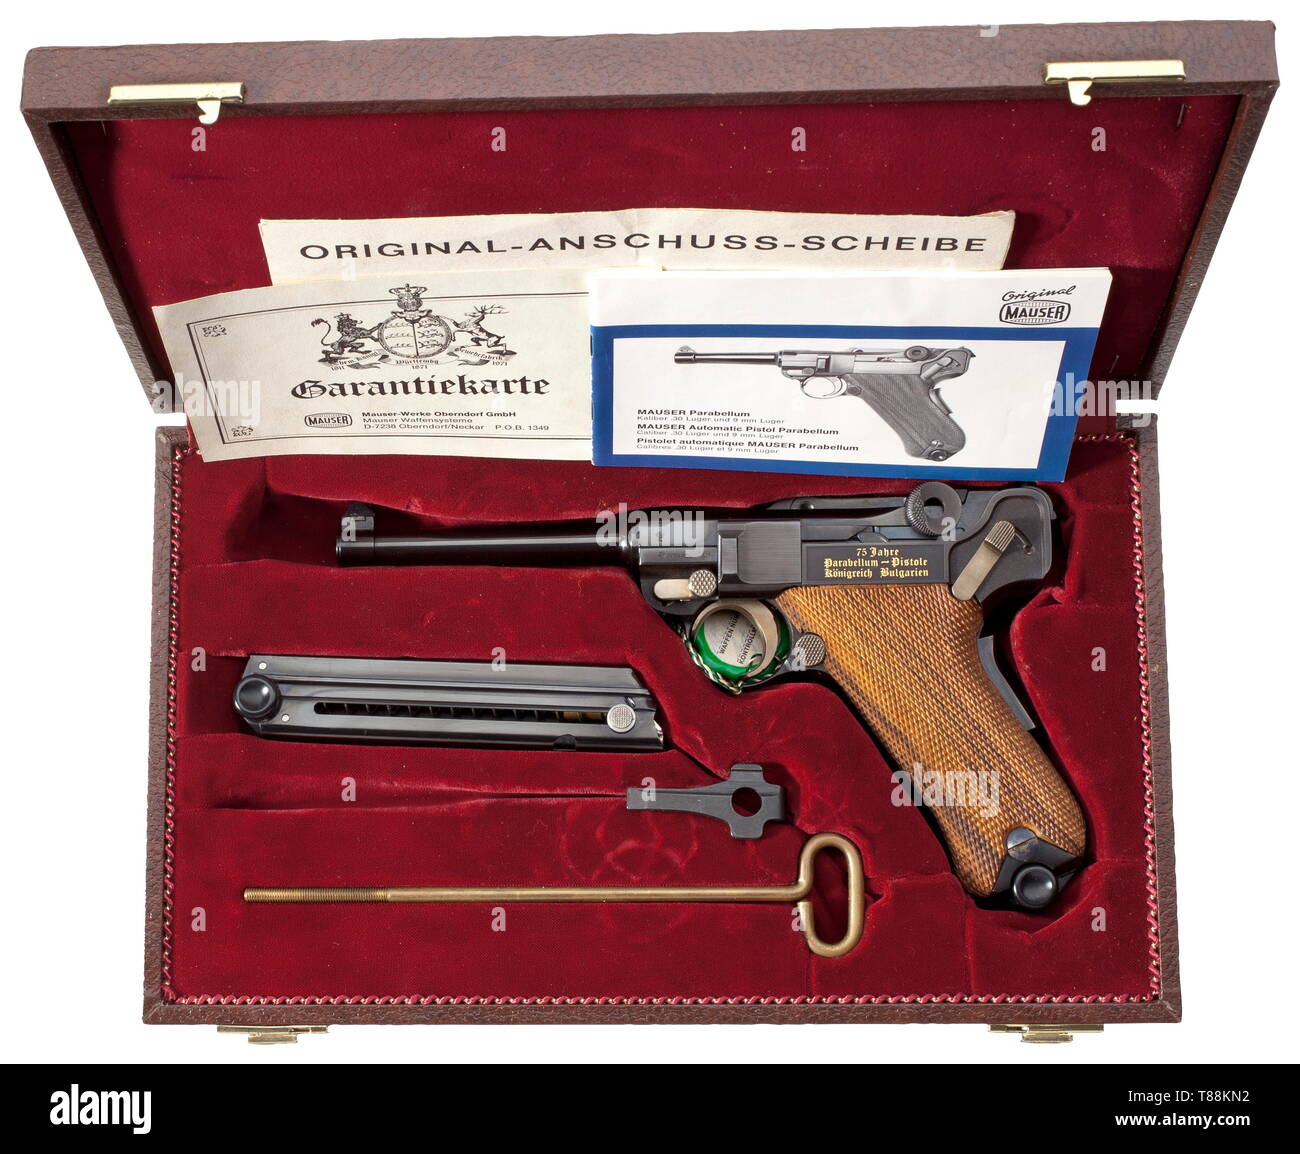 A Mauser Parabellum, commemorative model 'Königreich Bulgarien', in casket Cal. 7.65 Parabellum, no. 185/250B. Bright bore, length 120 mm. Proof-marked 1977. Grip safety. Safety and extractor marked in Cyrillic. On chamber etched engraving of Bulgarian coat of arms, on front toggle link 'DWM' in gold inlay. On left side of frame inlaid in gold '75 Jahre / Parabellum - Pistole / Königreich Bulgarien'. Complete black highly polished finish. Grip frame partially matted on the side. Operational parts strawed. Walnut grip panels. Magazine. Comes in da, Additional-Rights-Clearance-Info-Not-Available Stock Photo